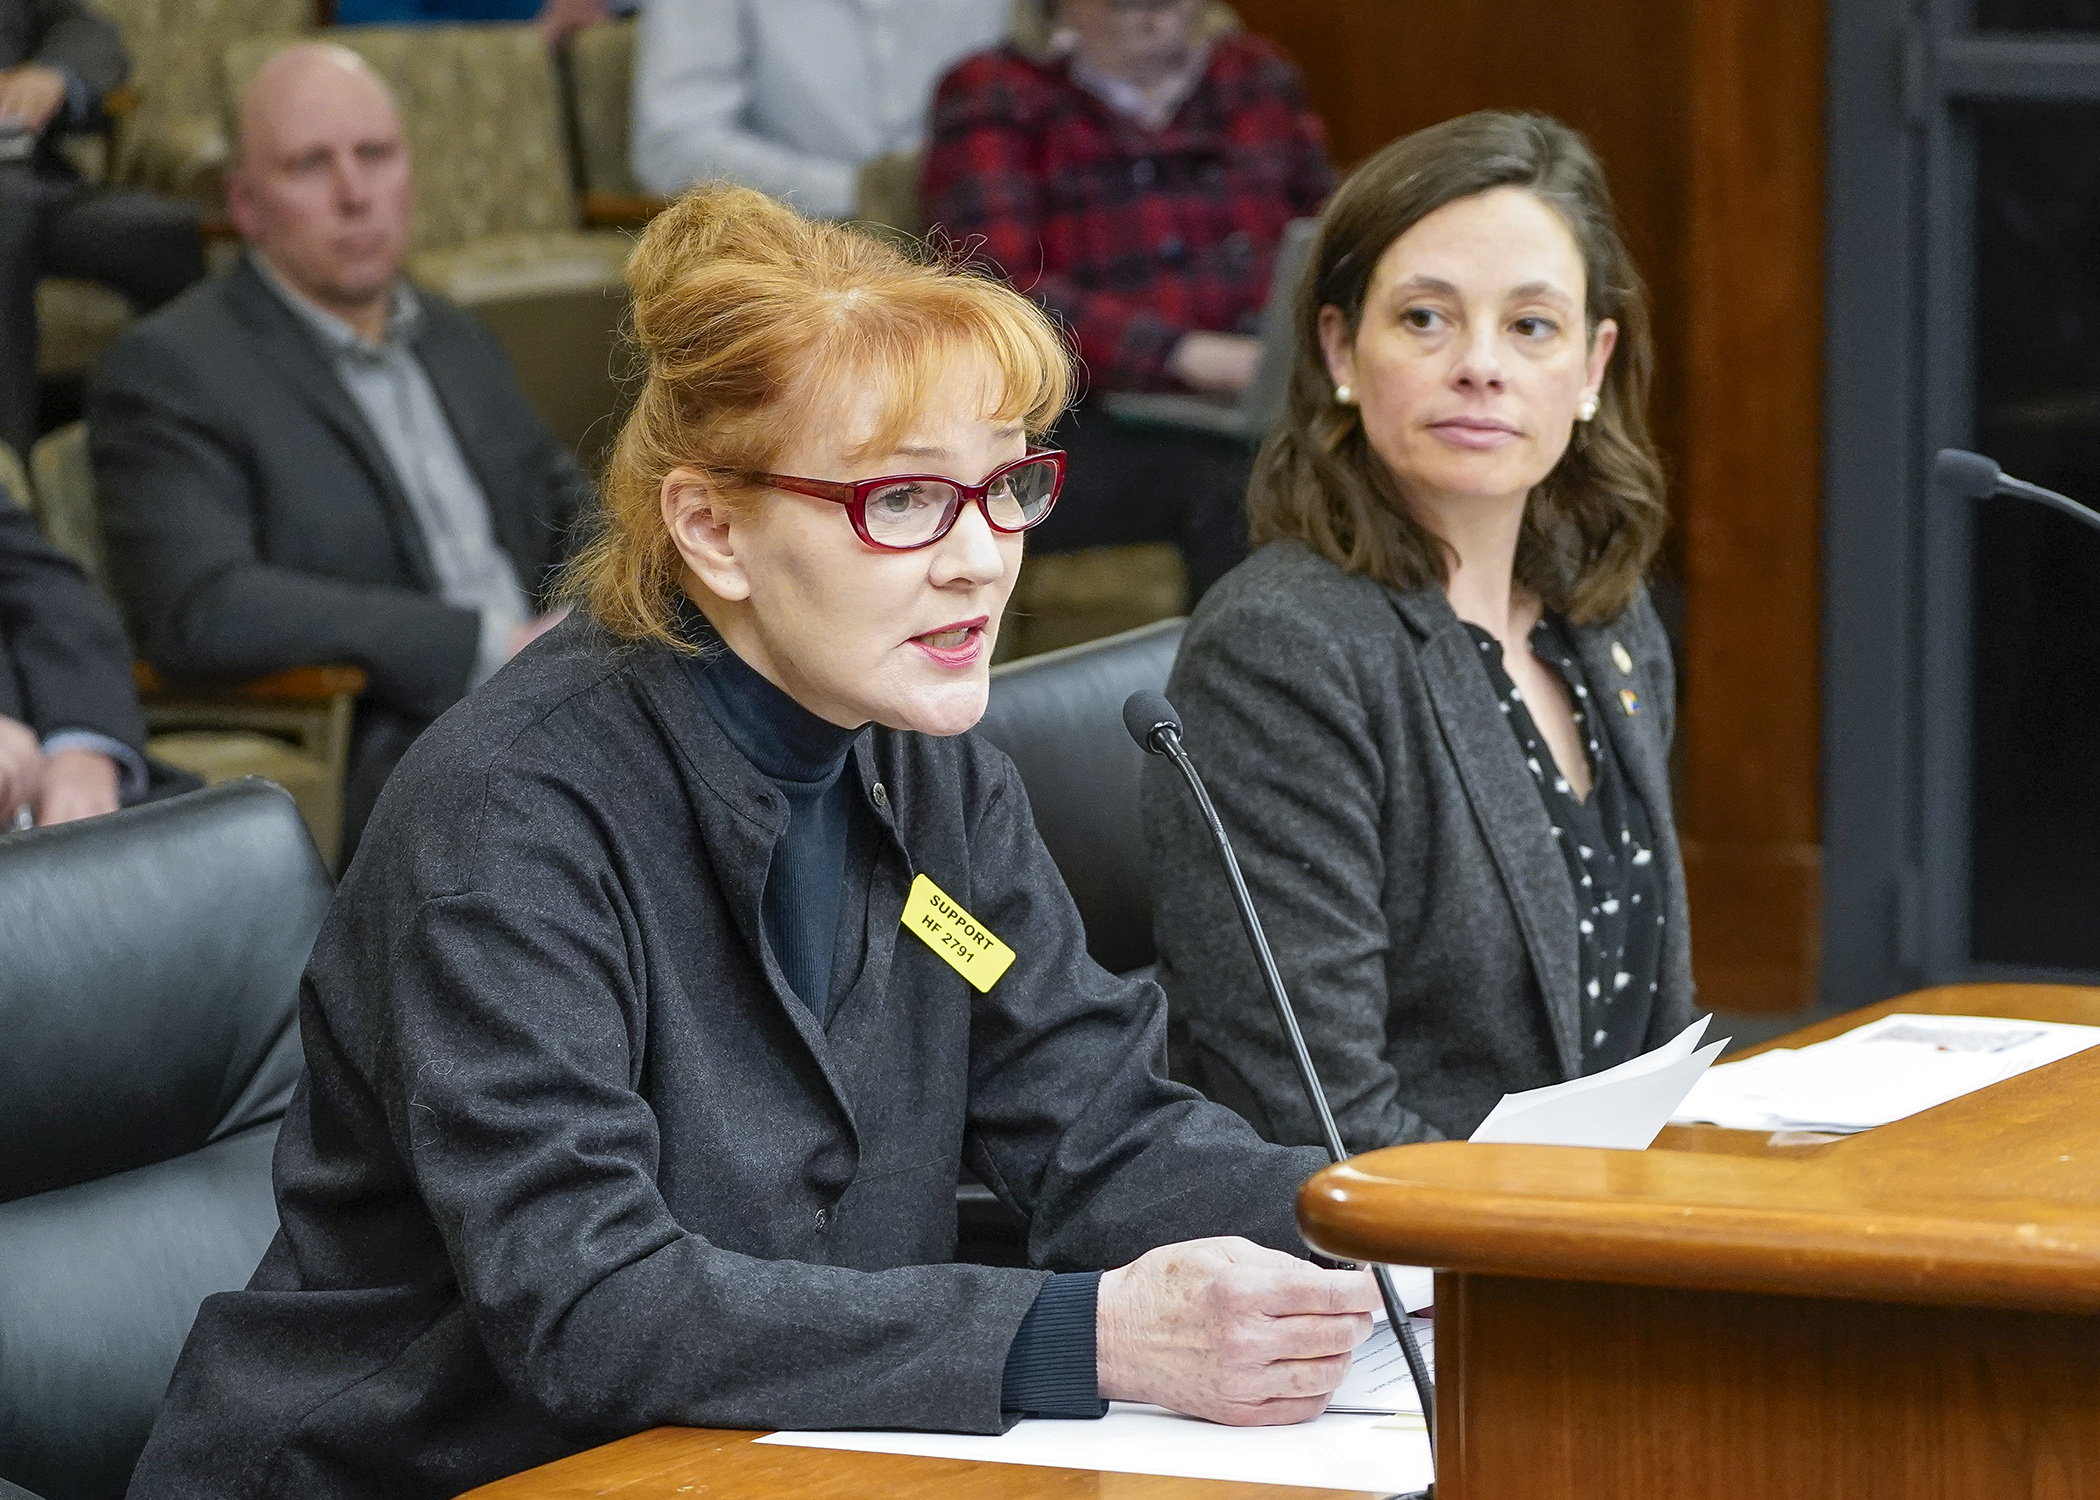 Representing the Minnesota Public Lands Coalition, Susan Schubert testifies before the House environment committee in support of a bill sponsored by Rep. Kristi Pursell, right, that would protect land, water quality and wildlife from the effects of using motorized recreational trails. (Photo by Andrew VonBank)